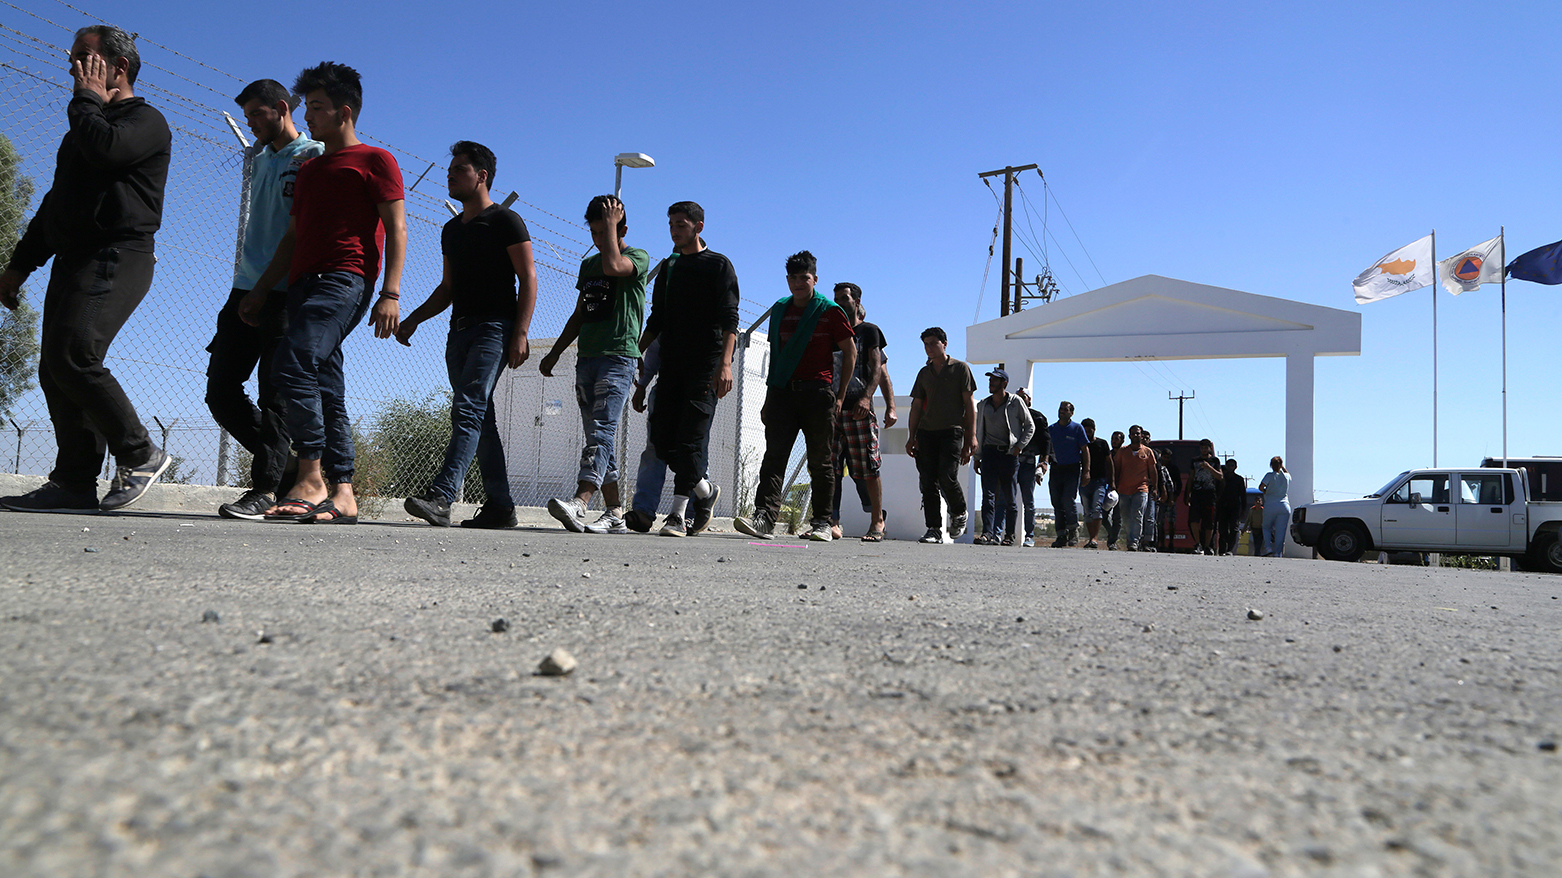 Migrants from Syria walk towards a refugee camp at Kokkinotrimithia, outside of the capital Nicosia, in the eastern Mediterranean island of Cyprus on Sunday, Sept. 10, 2017. (Photo: Petros Karadjias/ AP)